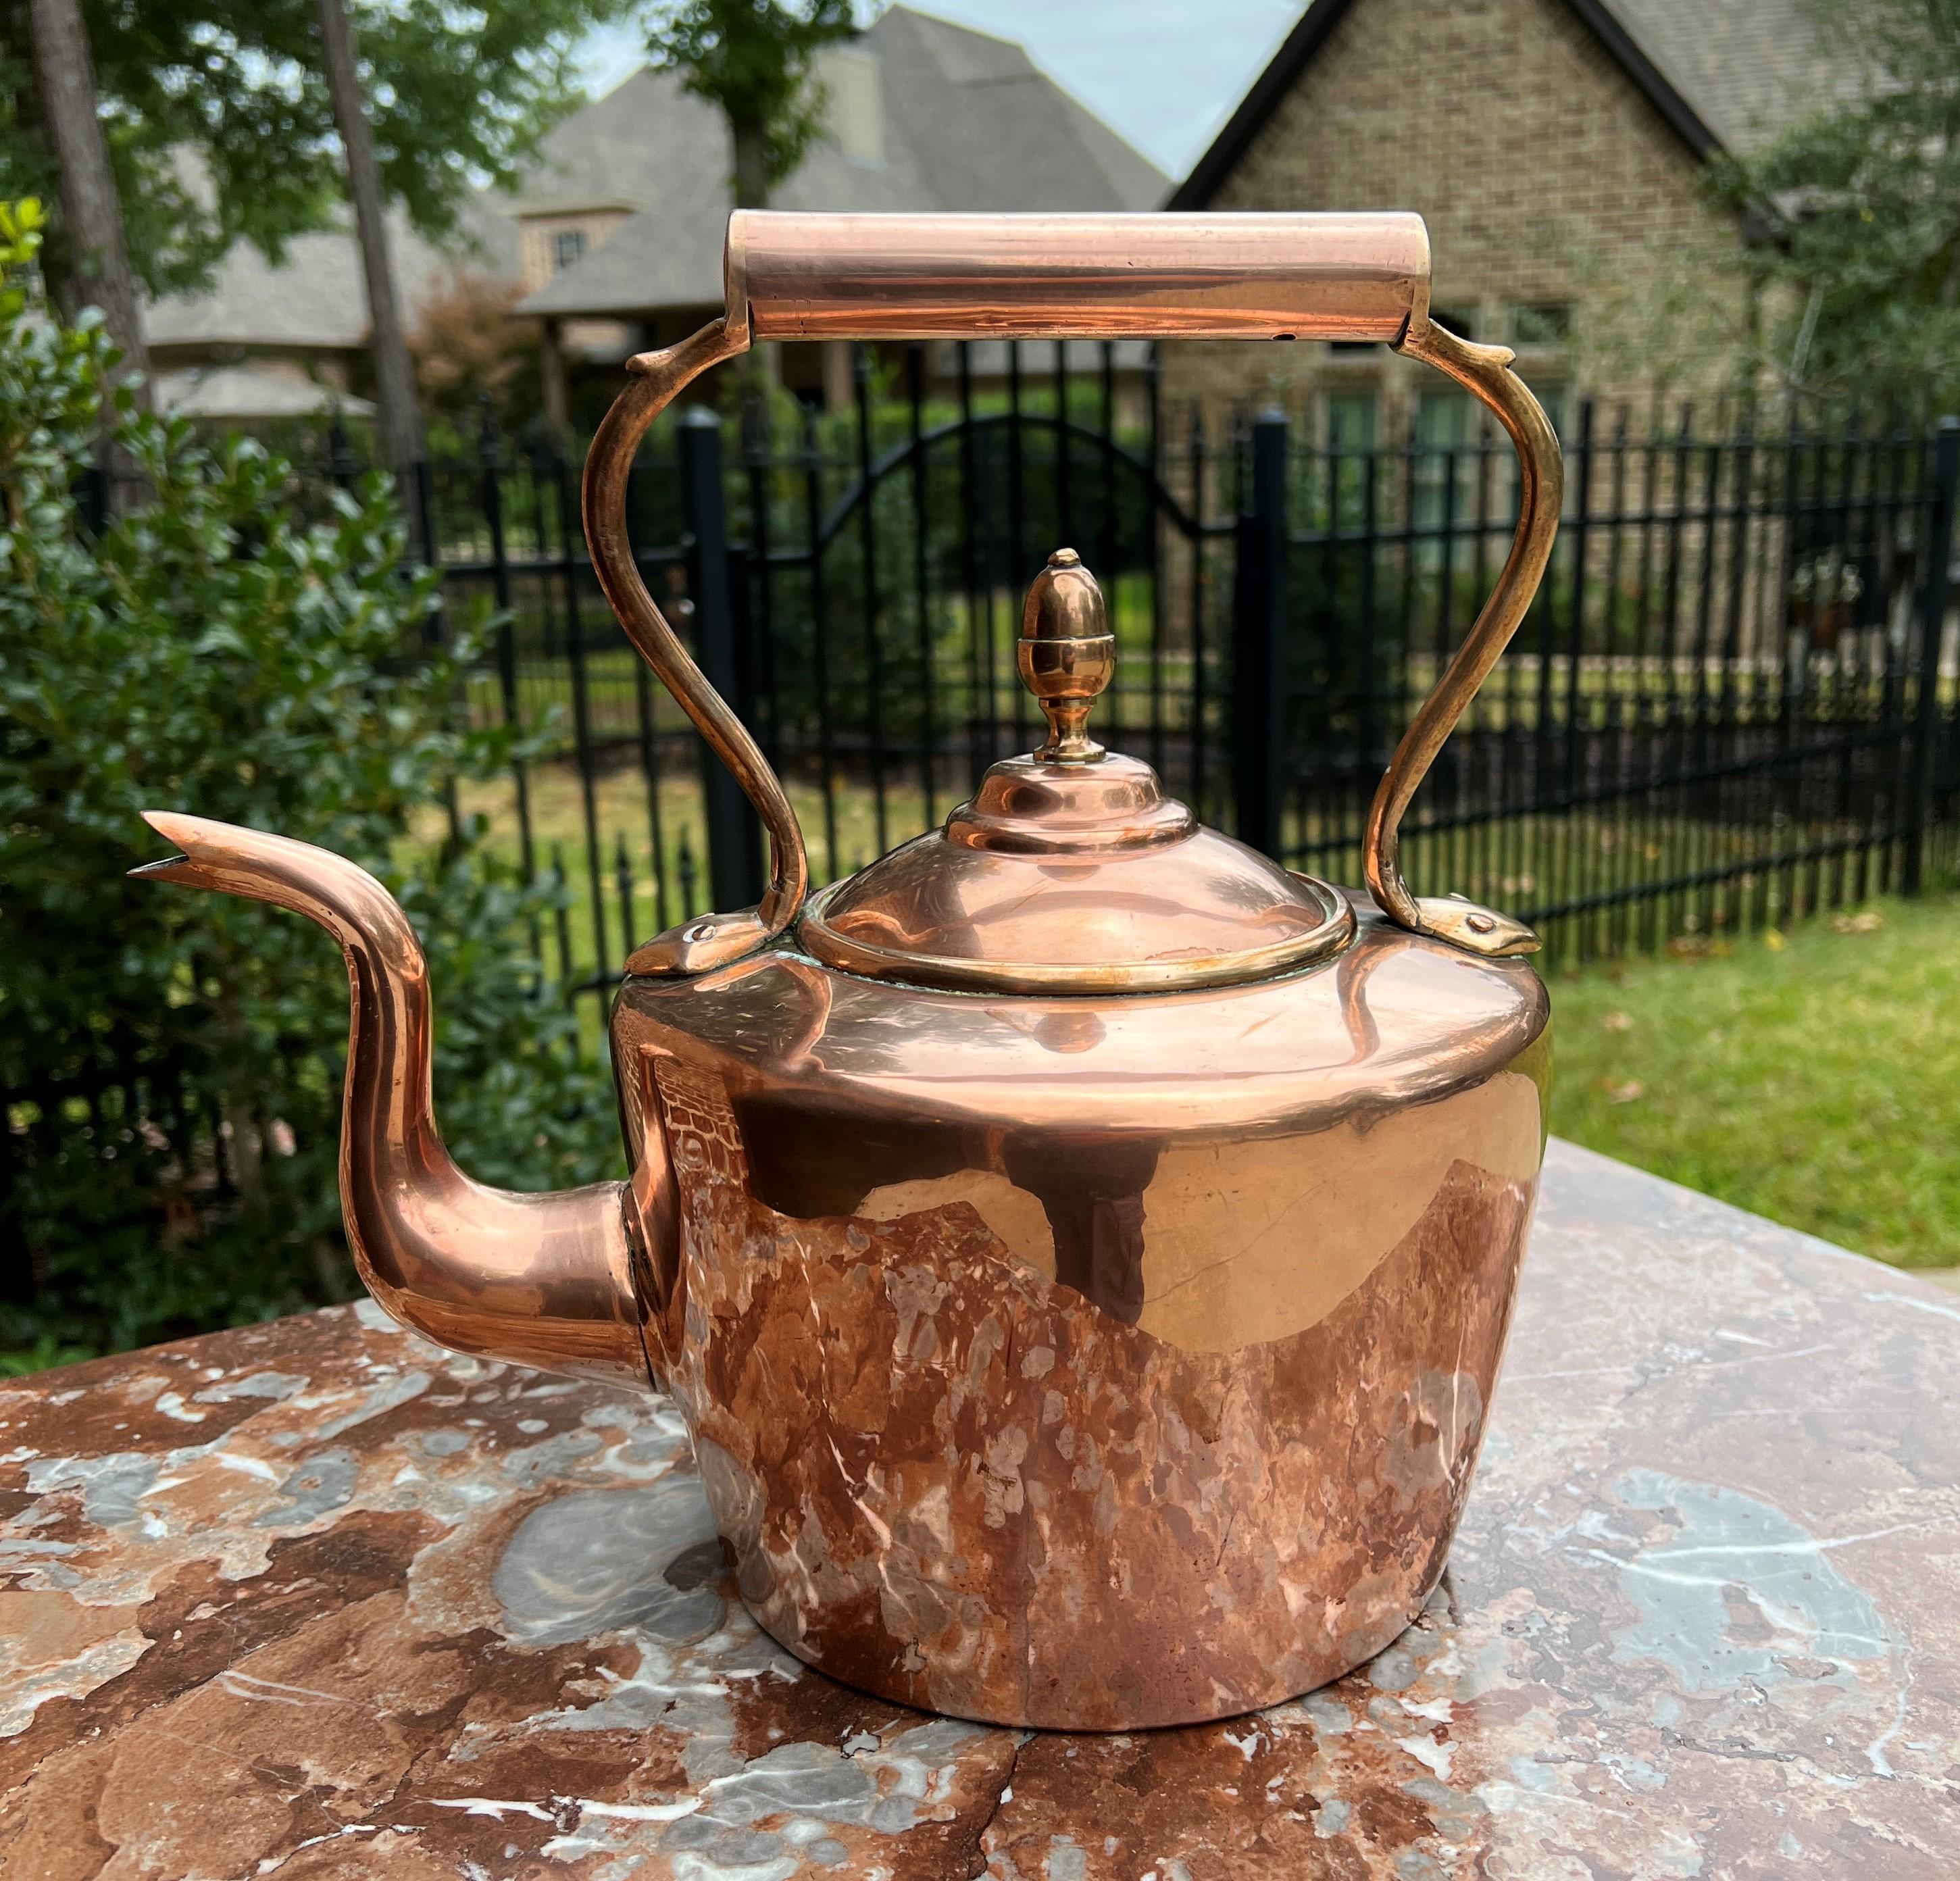 CHARMING Antique English Copper Tea or Coffee Kettle with Pour Spout, Lid, and Copper Handle #1~~c. 1900

